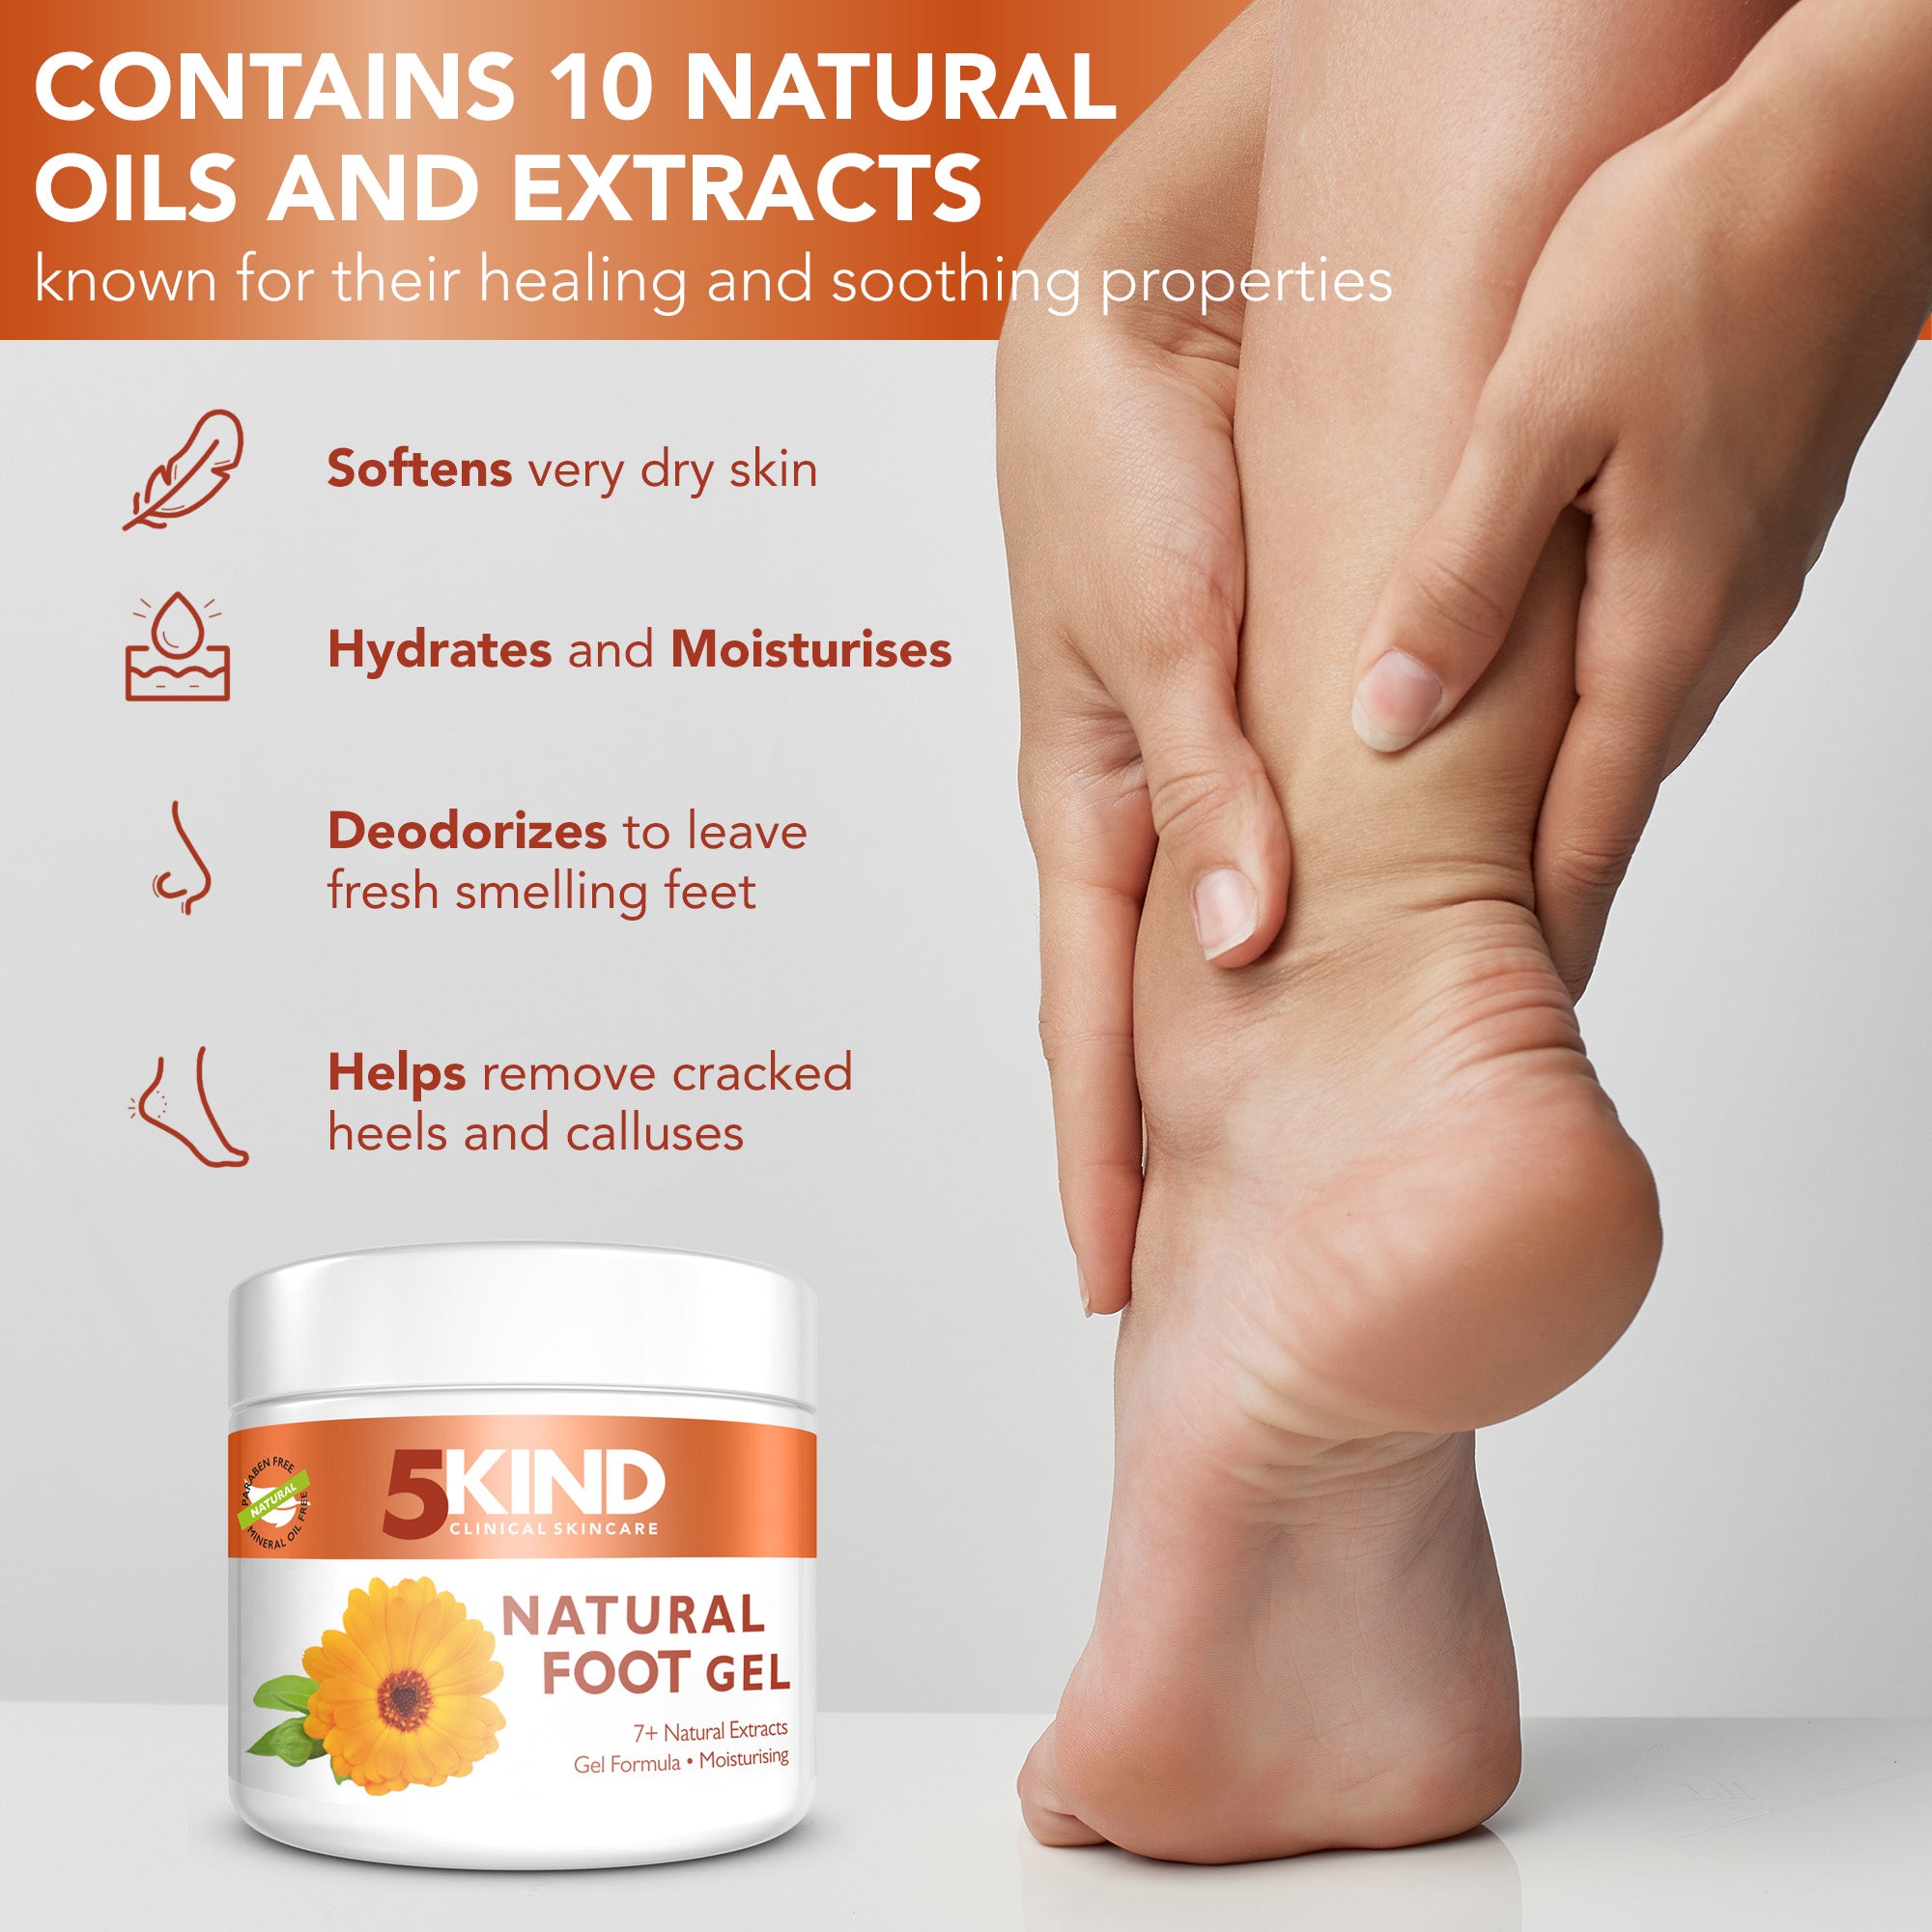 Summer Heat Is Not Ideal For Our Feet-Cracked Heels and Dry Skin